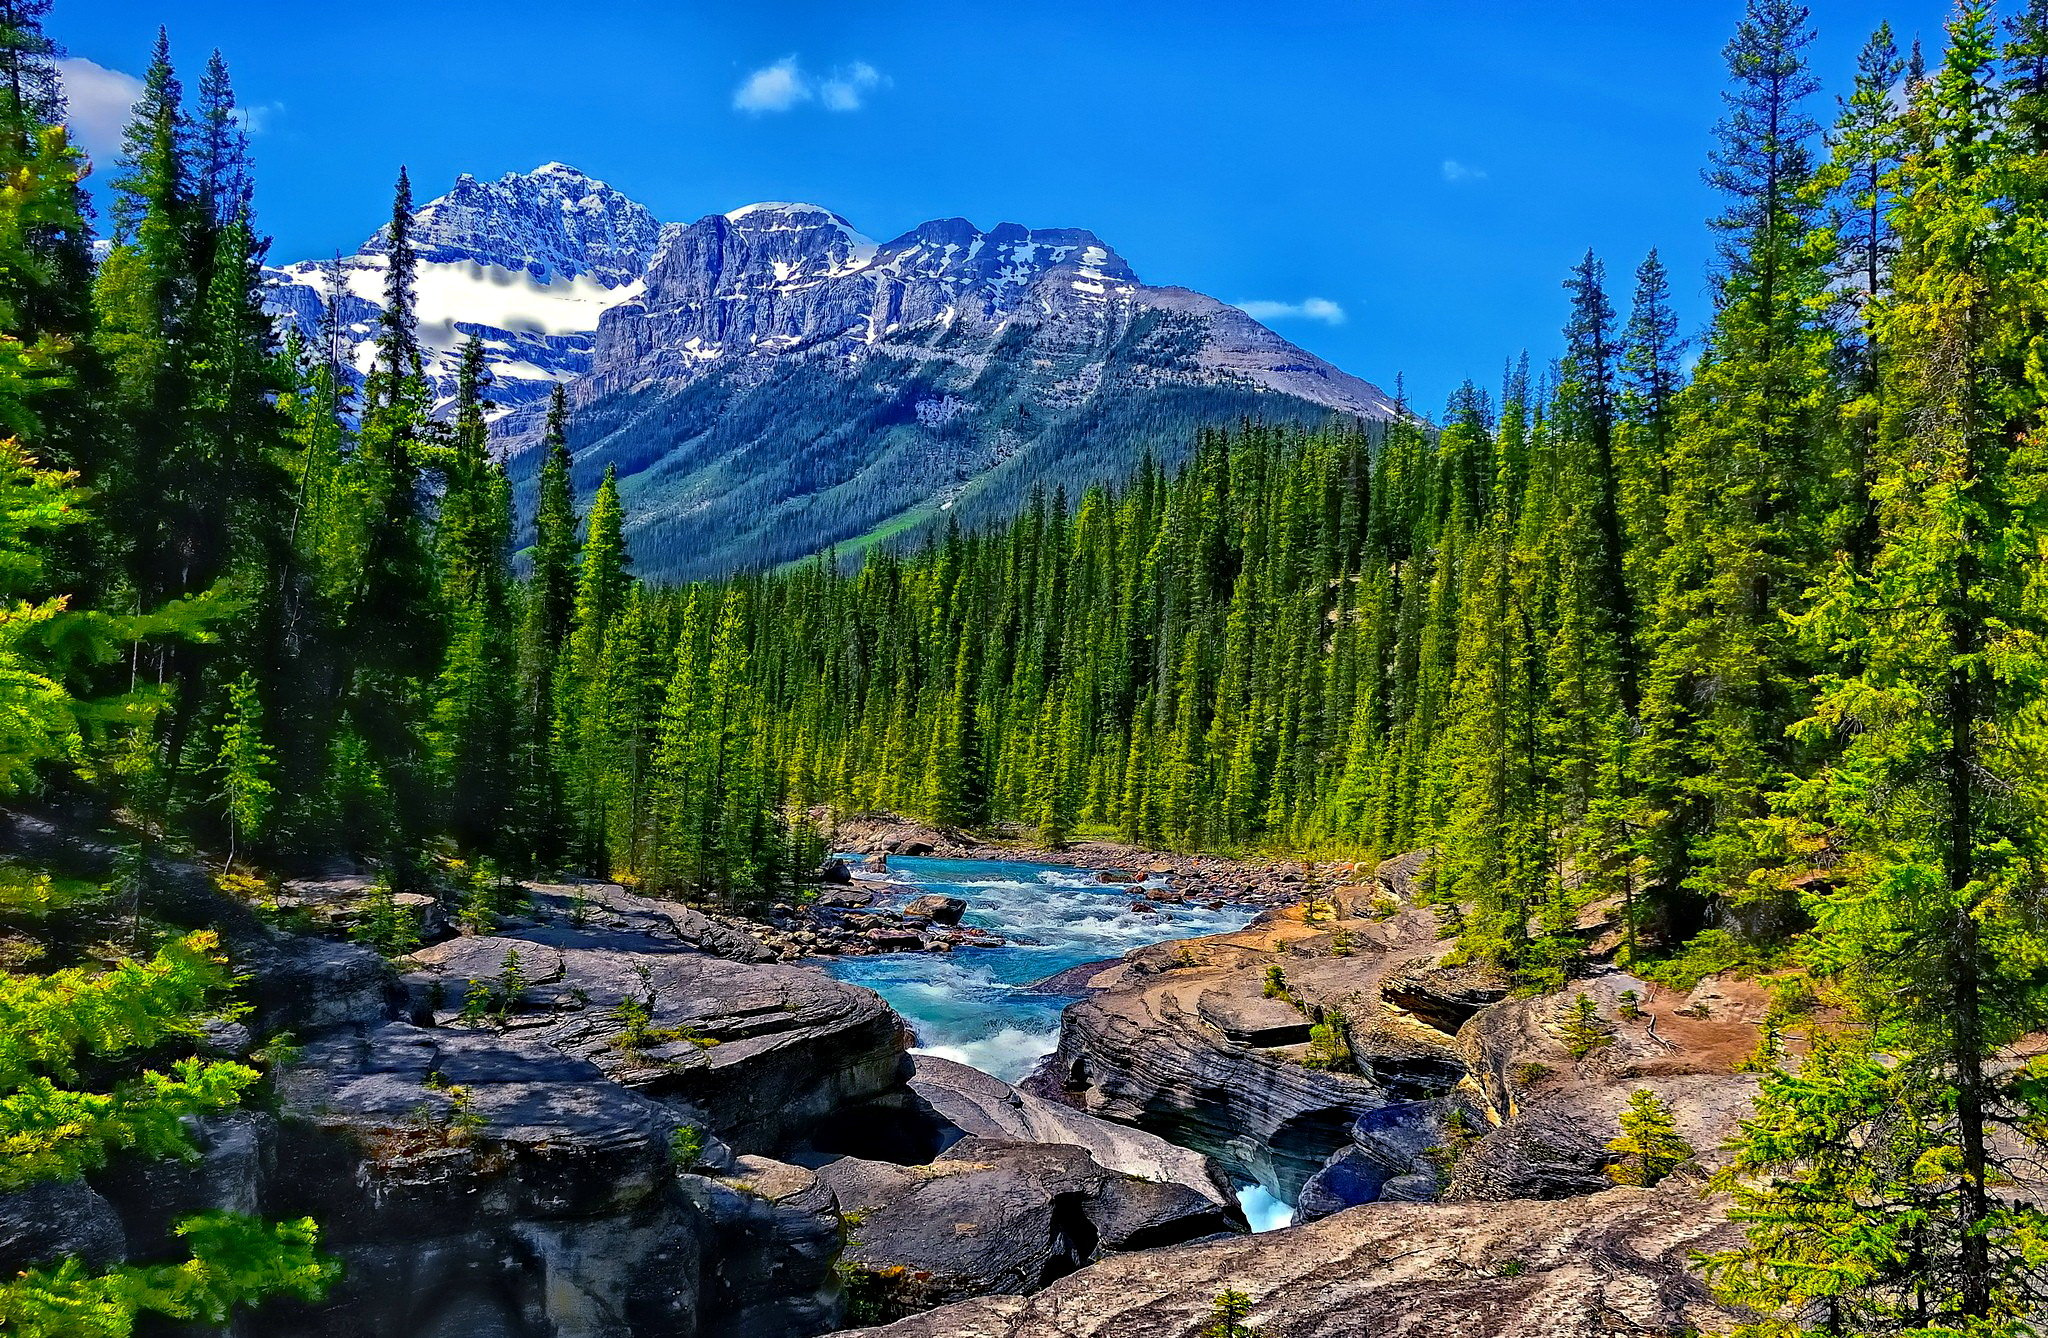 Mountain River Photos Download The BEST Free Mountain River Stock Photos   HD Images